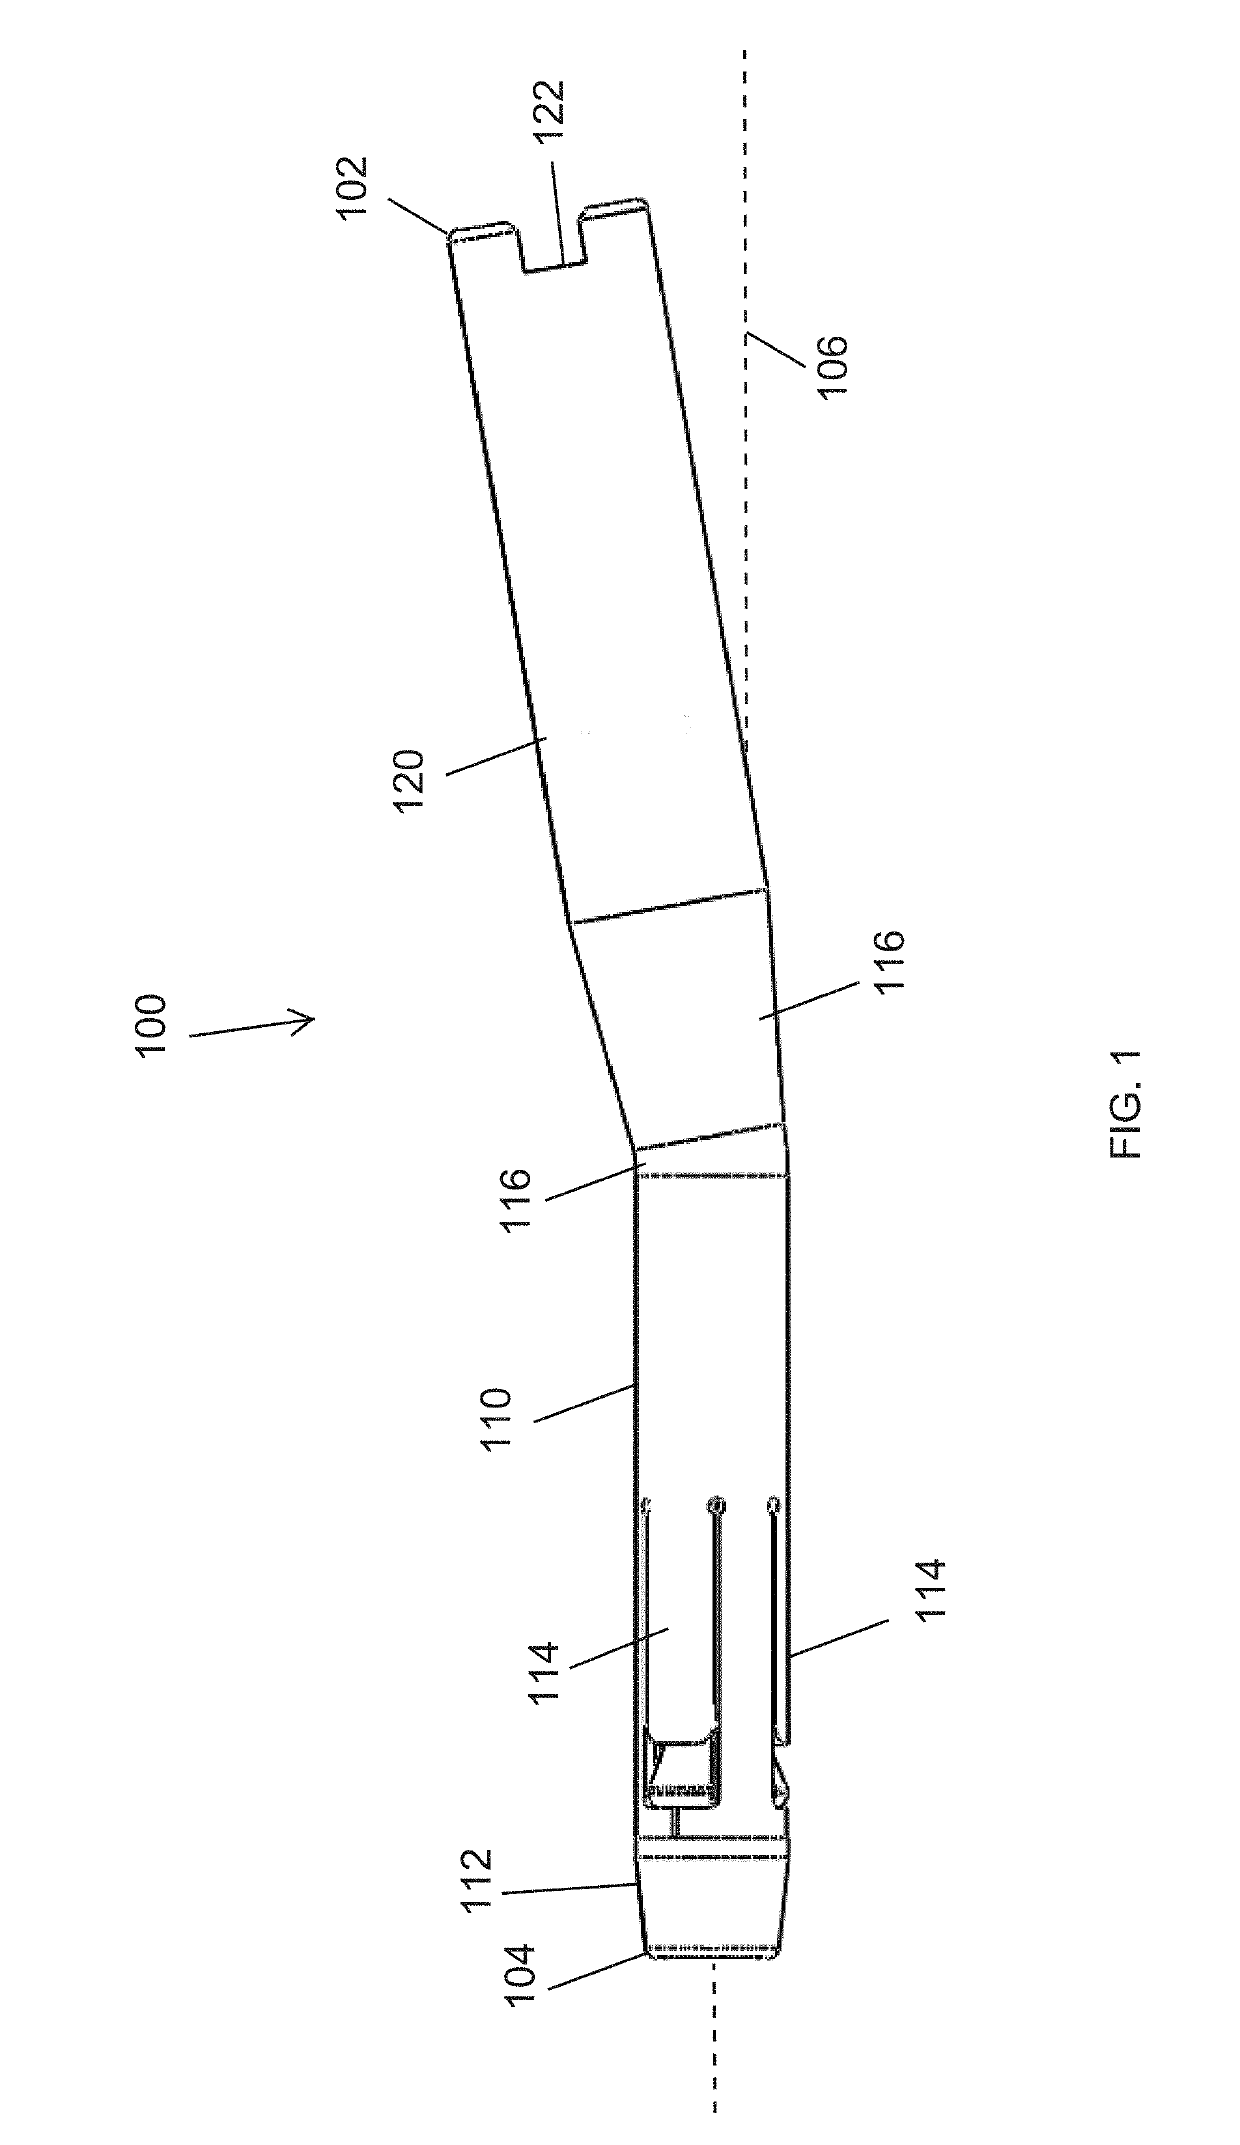 Fifth metatarsal repair systems and methods of use